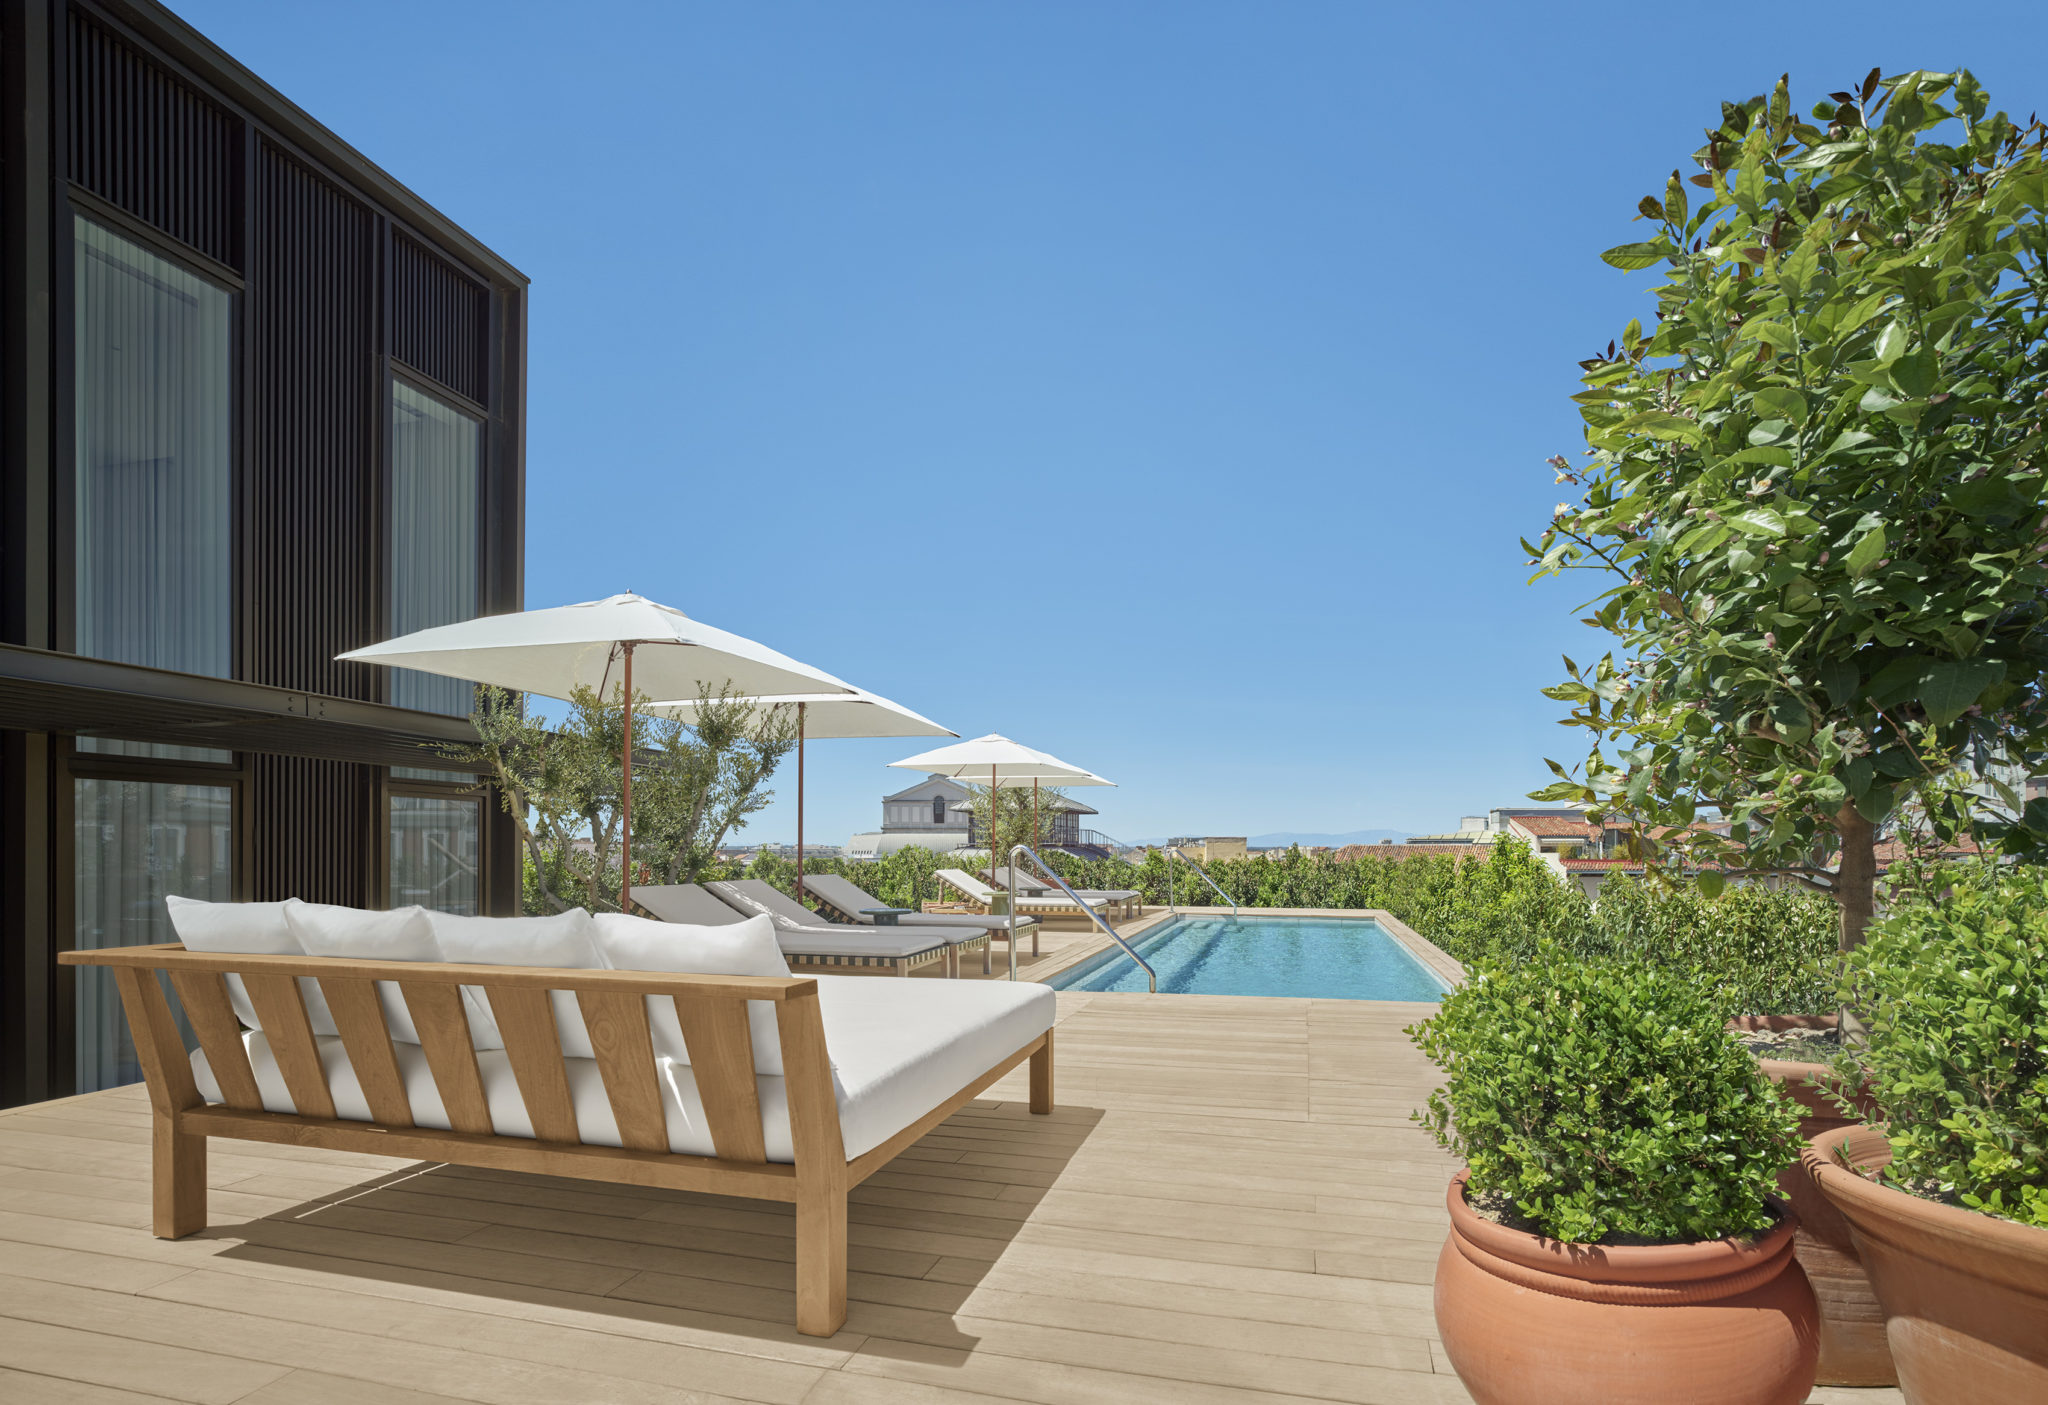 Private rooftop pool with sun loungers and umbrellas